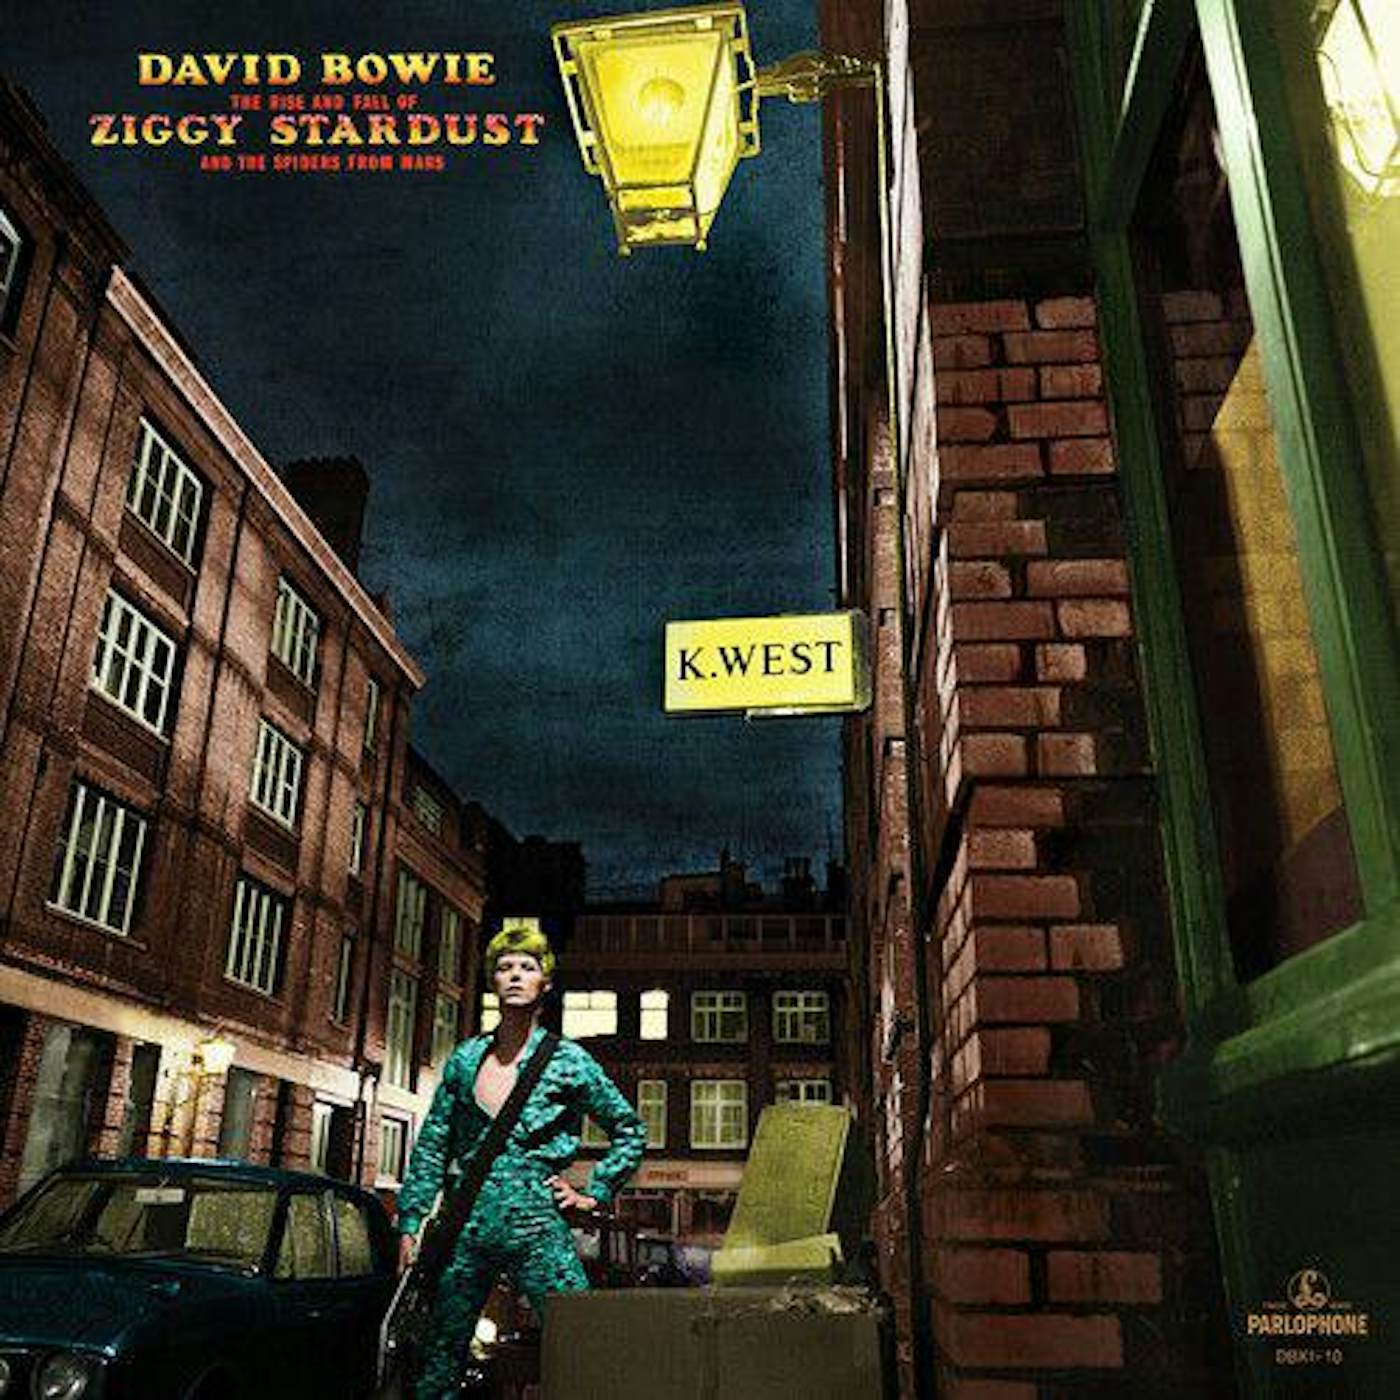 David Bowie The Rise and Fall of Ziggy Stardust and the Spiders from Mars (Remastered/Half-Speed Mastering) Vinyl Record